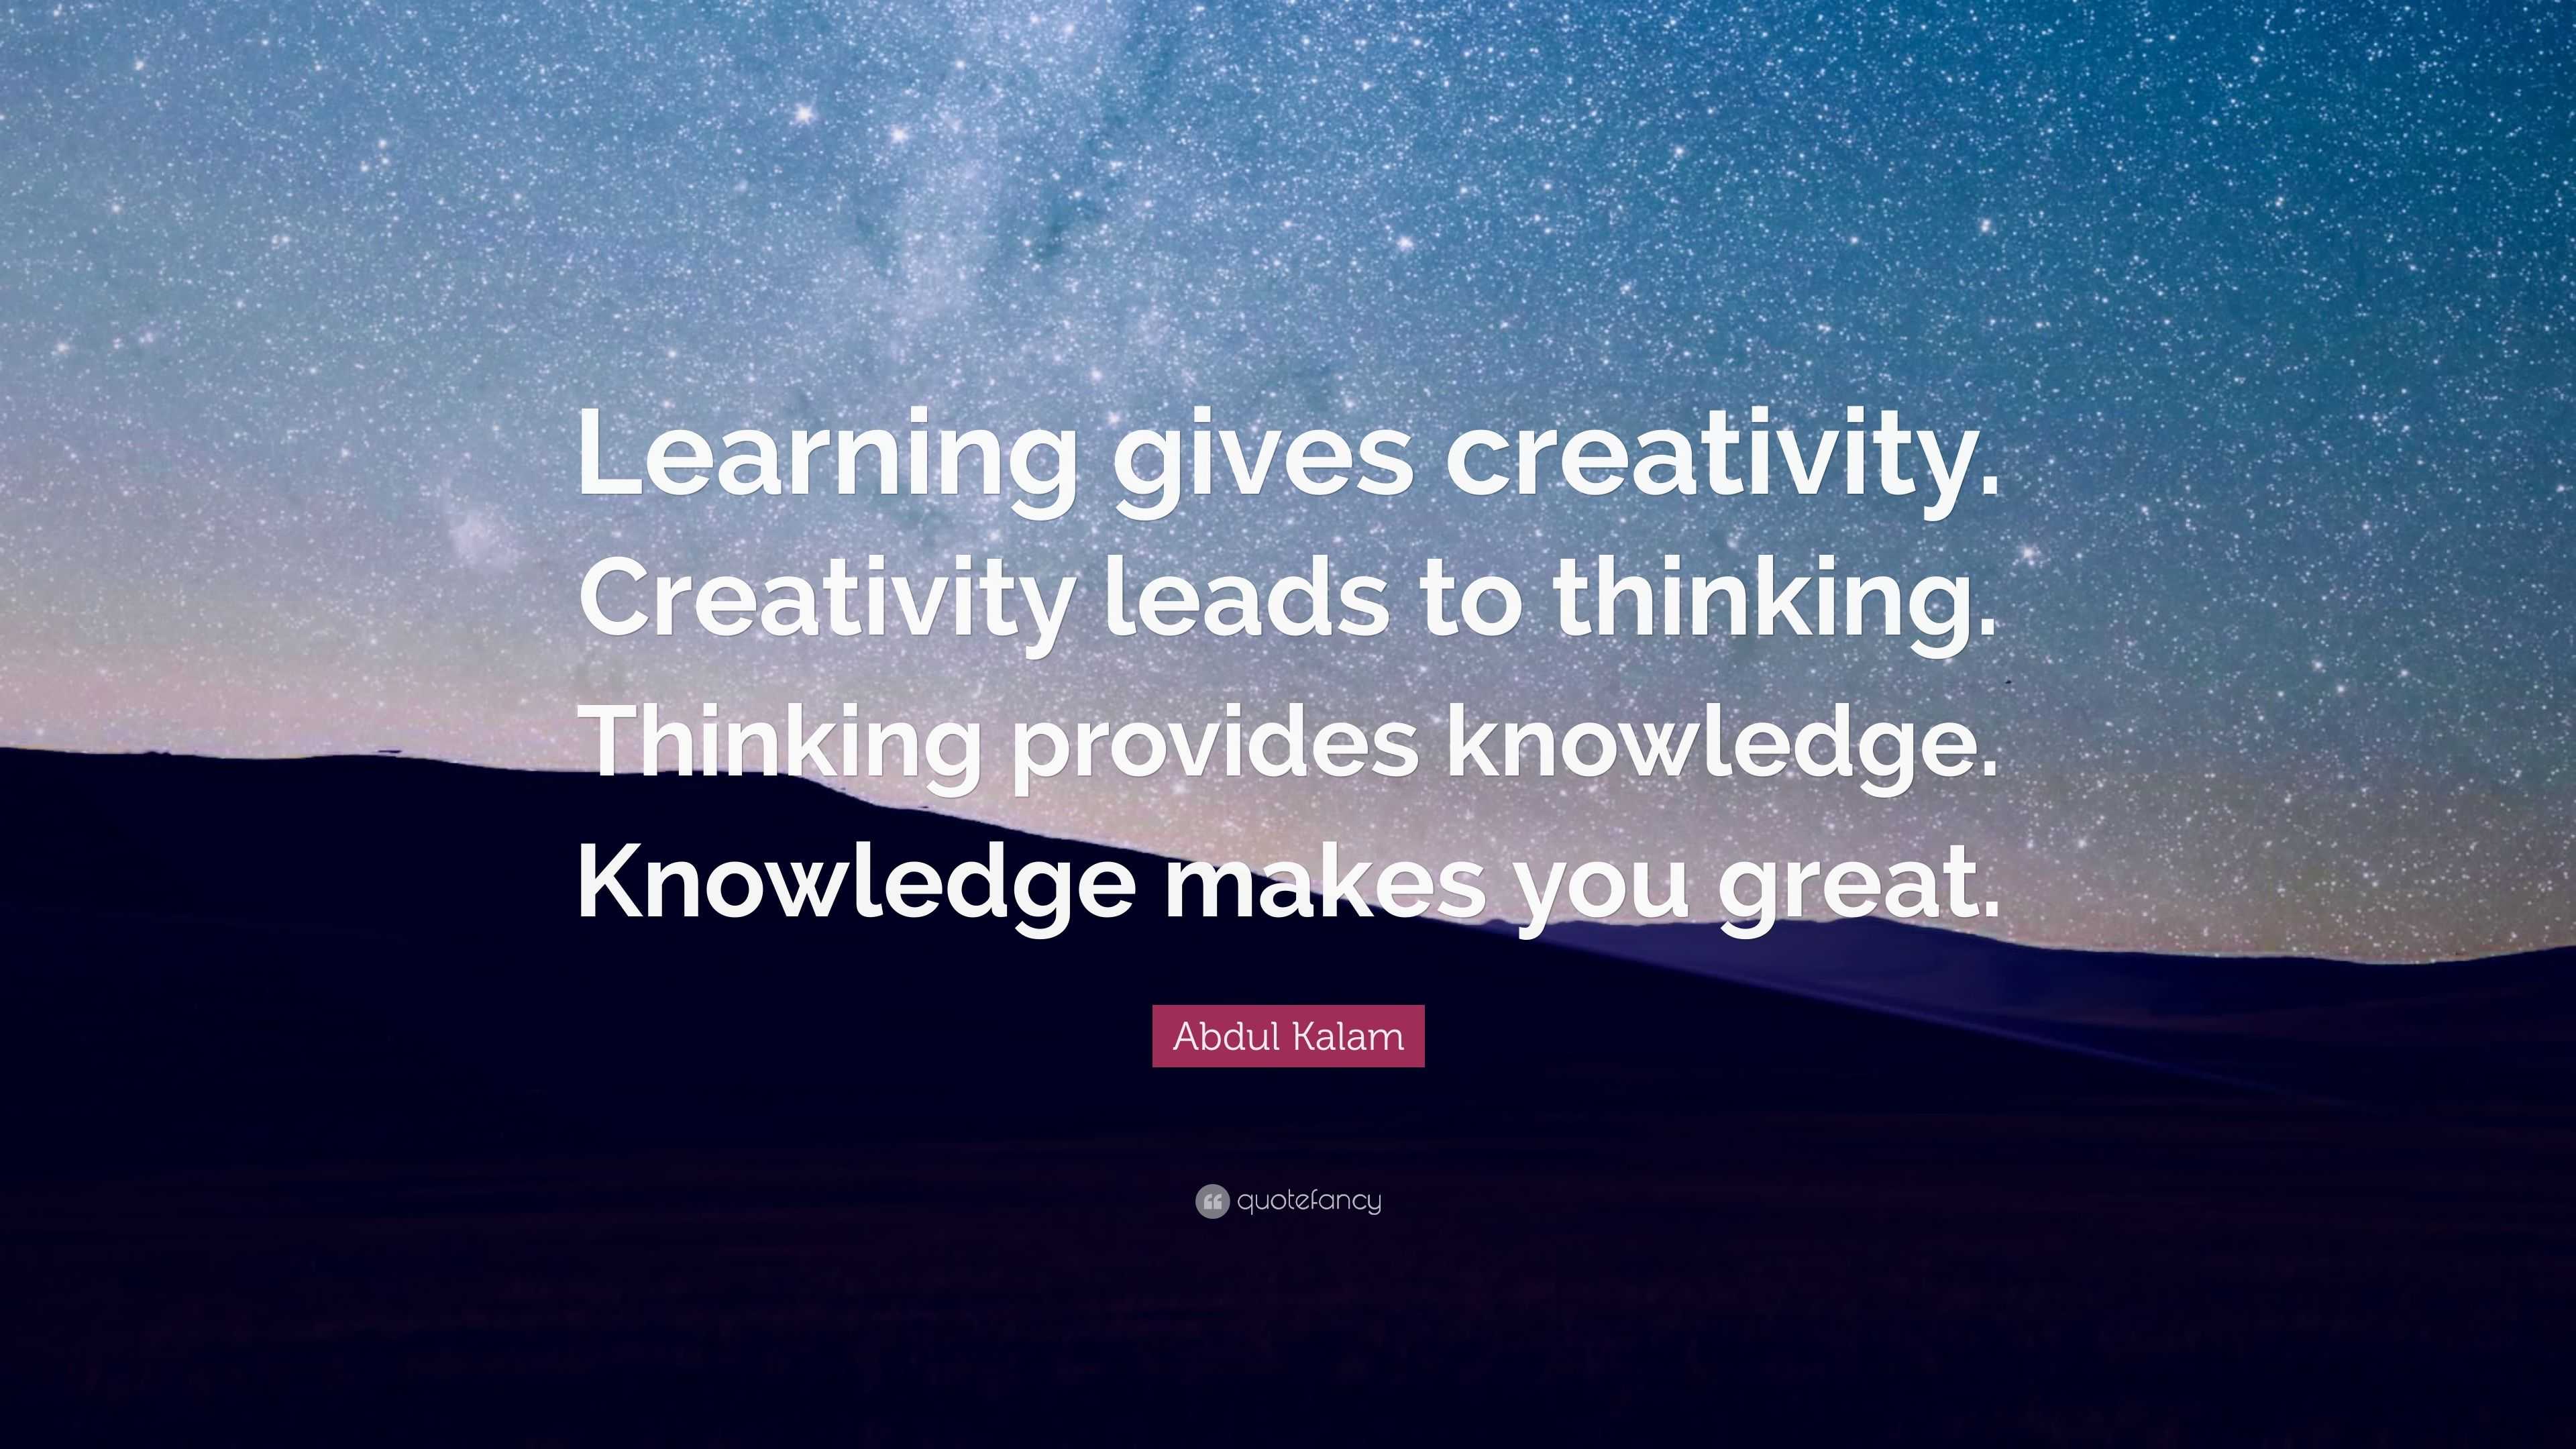 Abdul Kalam Quote: “Learning gives creativity. Creativity leads to